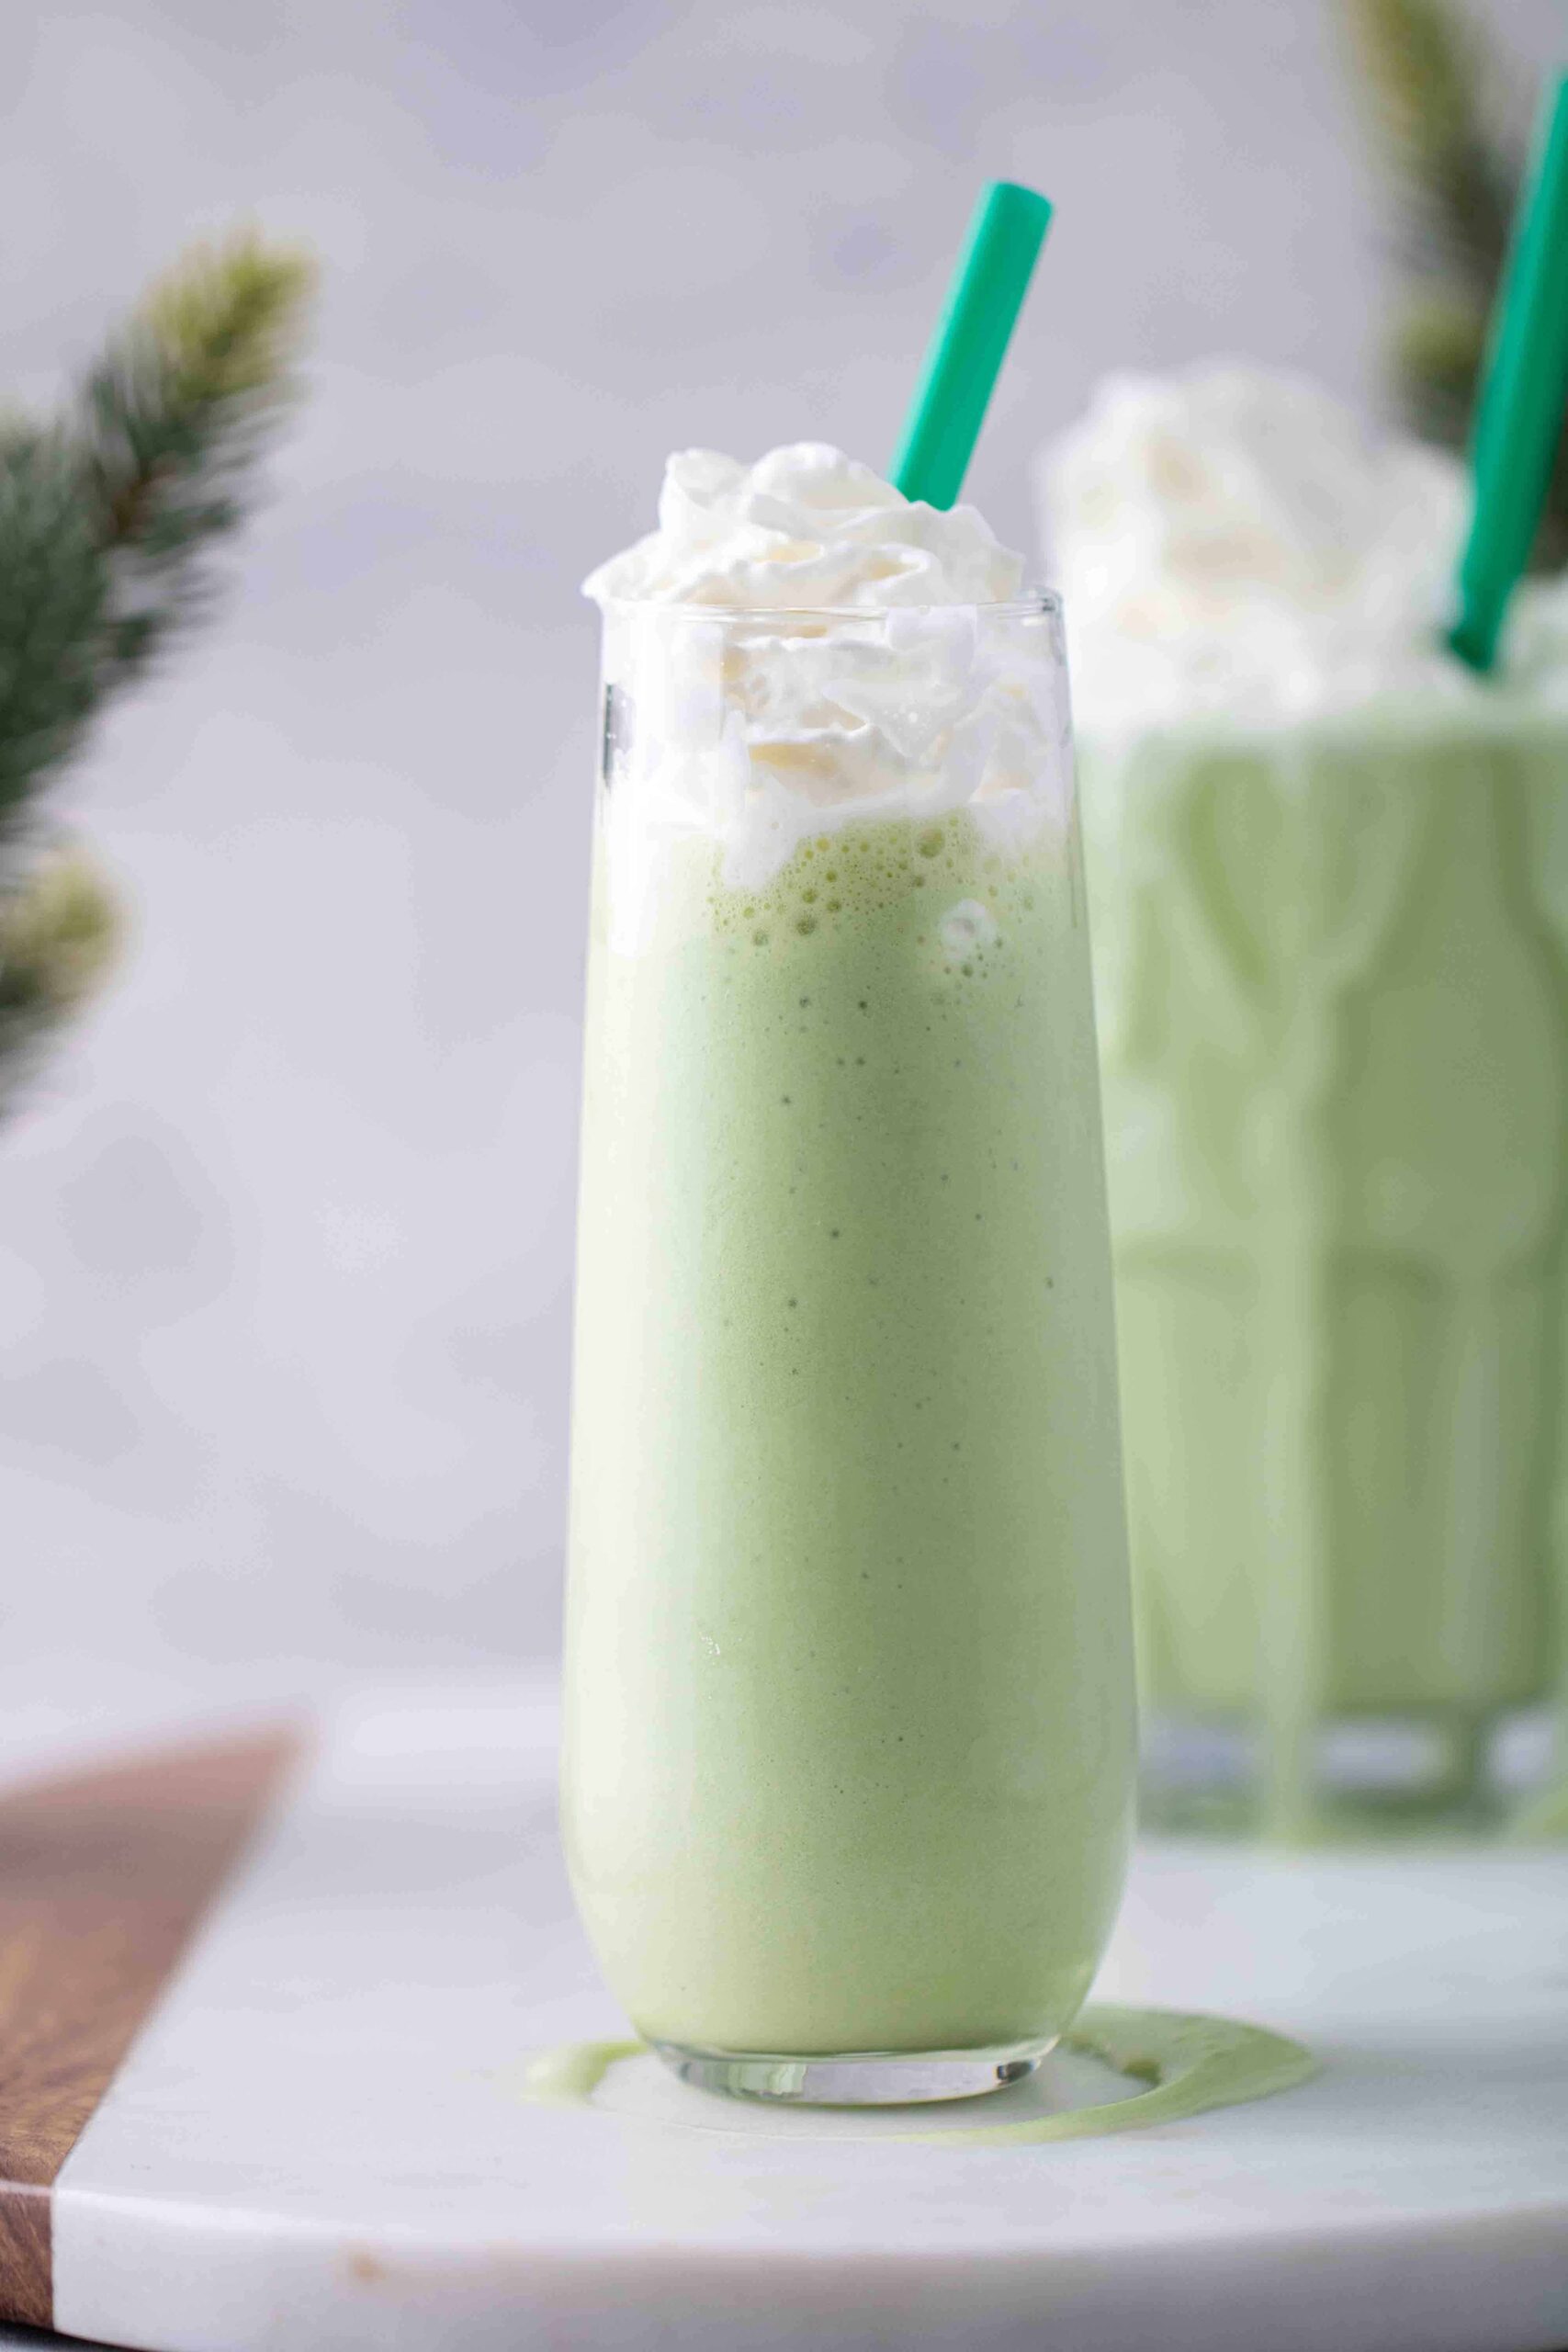 Matcha Frappuccino with a Blueberry Swirl - Del's cooking twist